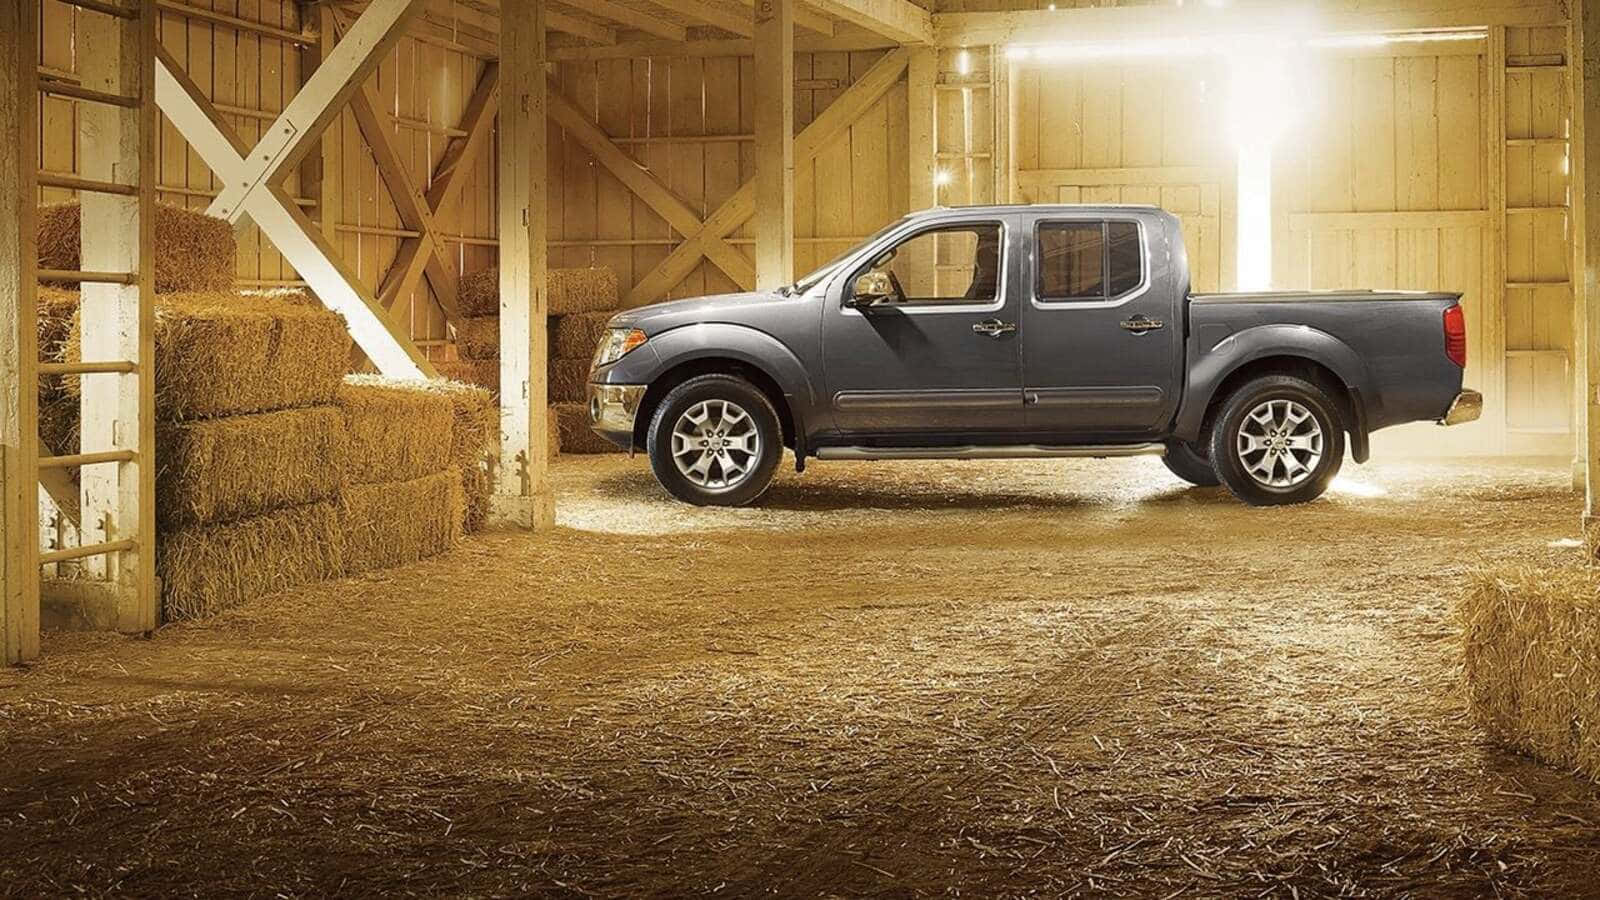 Caption: Nissan Frontier Showcasing Robust Power In The Wilderness Wallpaper